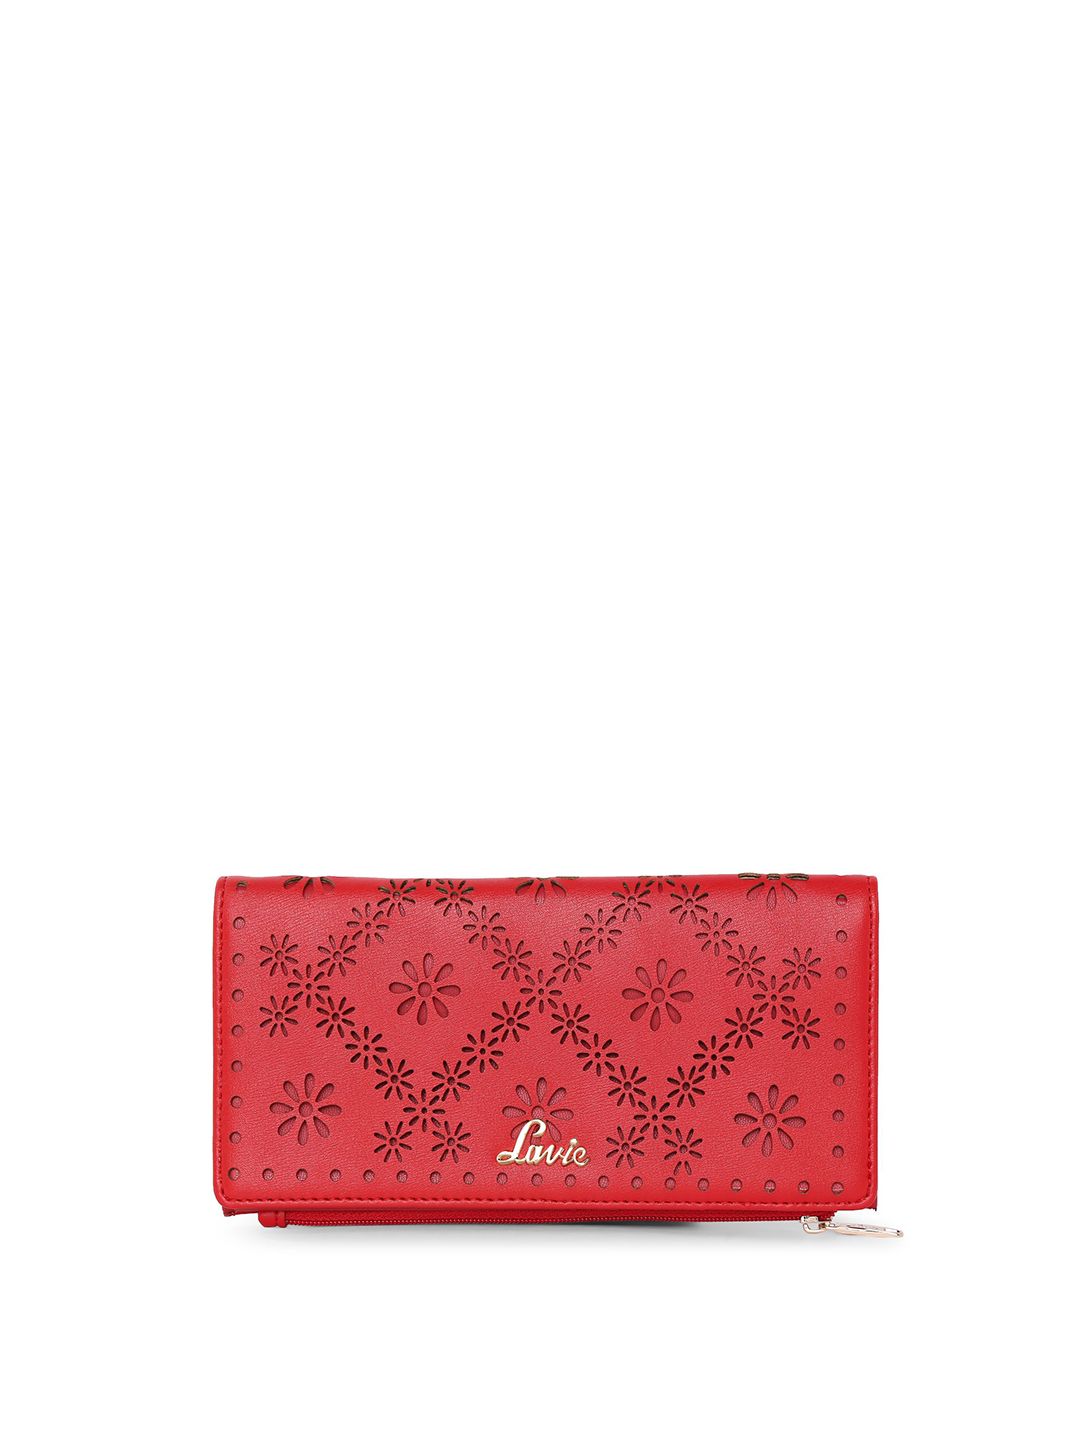 Lavie Women Red Cut-Out Design Two Fold Wallet Price in India